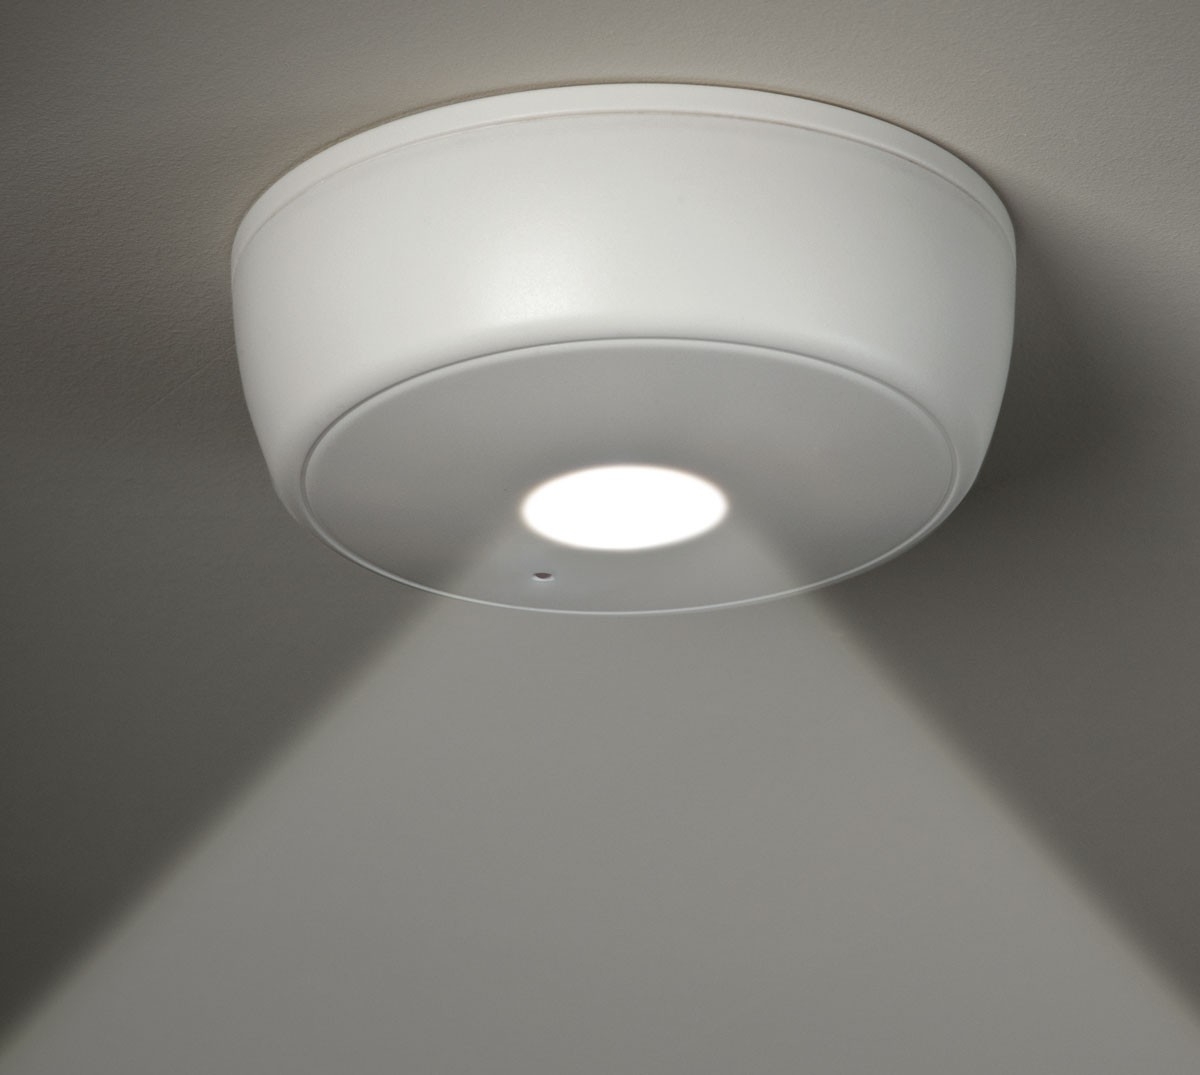 Wireless Ceiling Lights With Remote